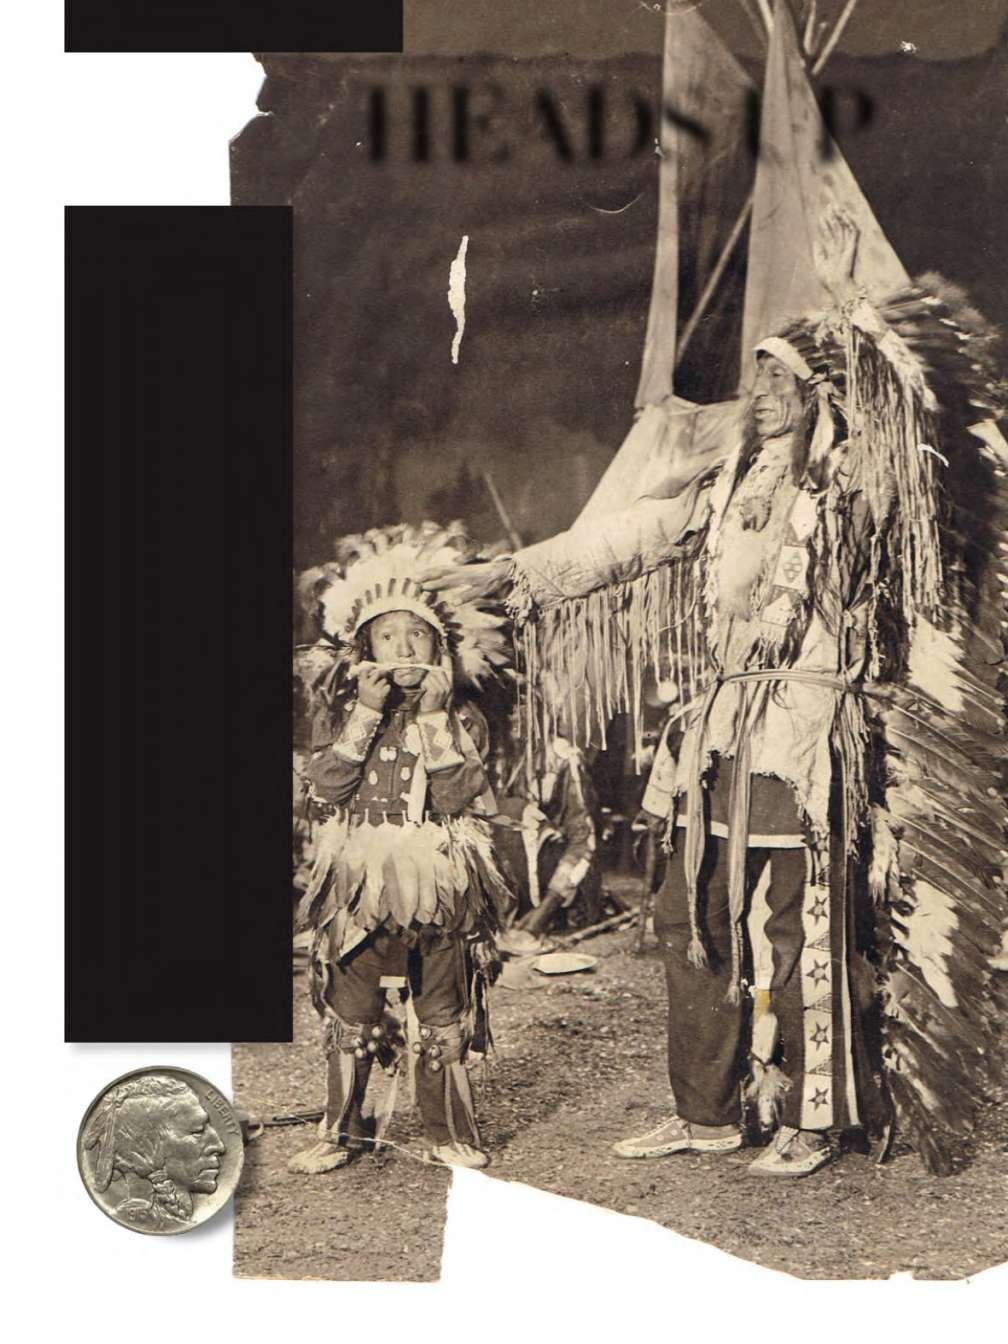 Westerners HEADS UP Recognize the profile of this Oglala Lakota chief?